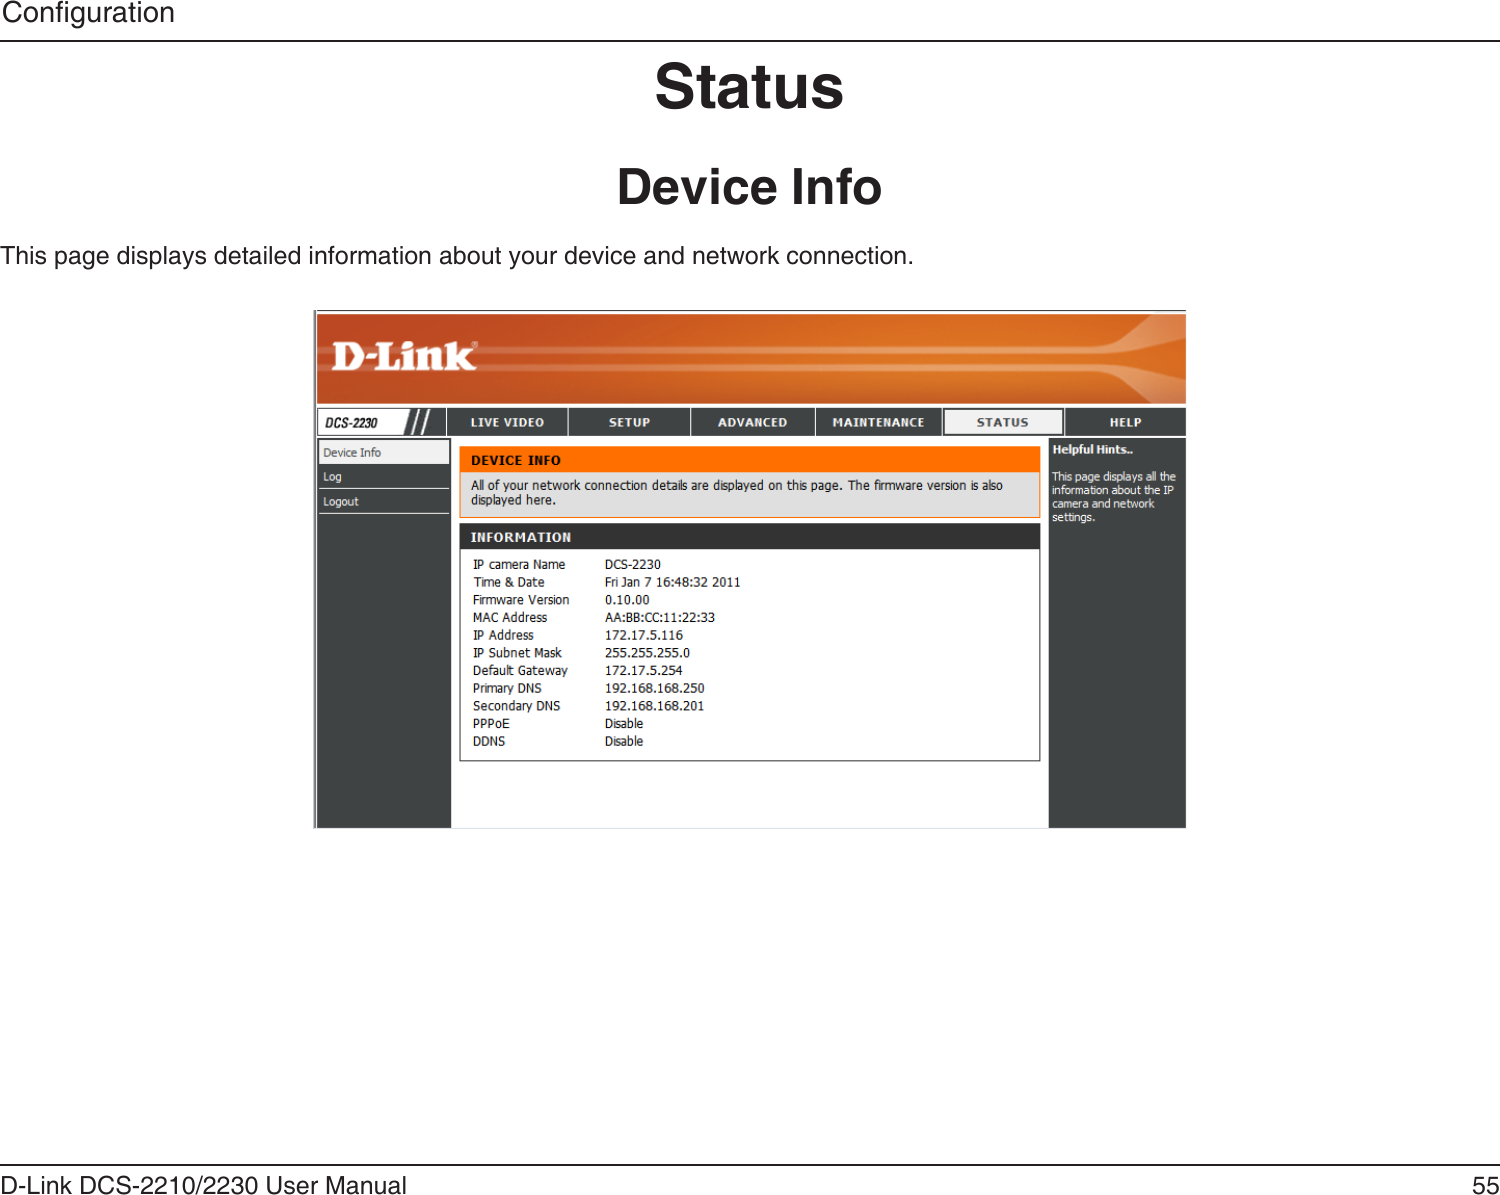 55D-Link DCS-2210/2230 User ManualCongurationStatusThis page displays detailed information about your device and network connection.Device Info